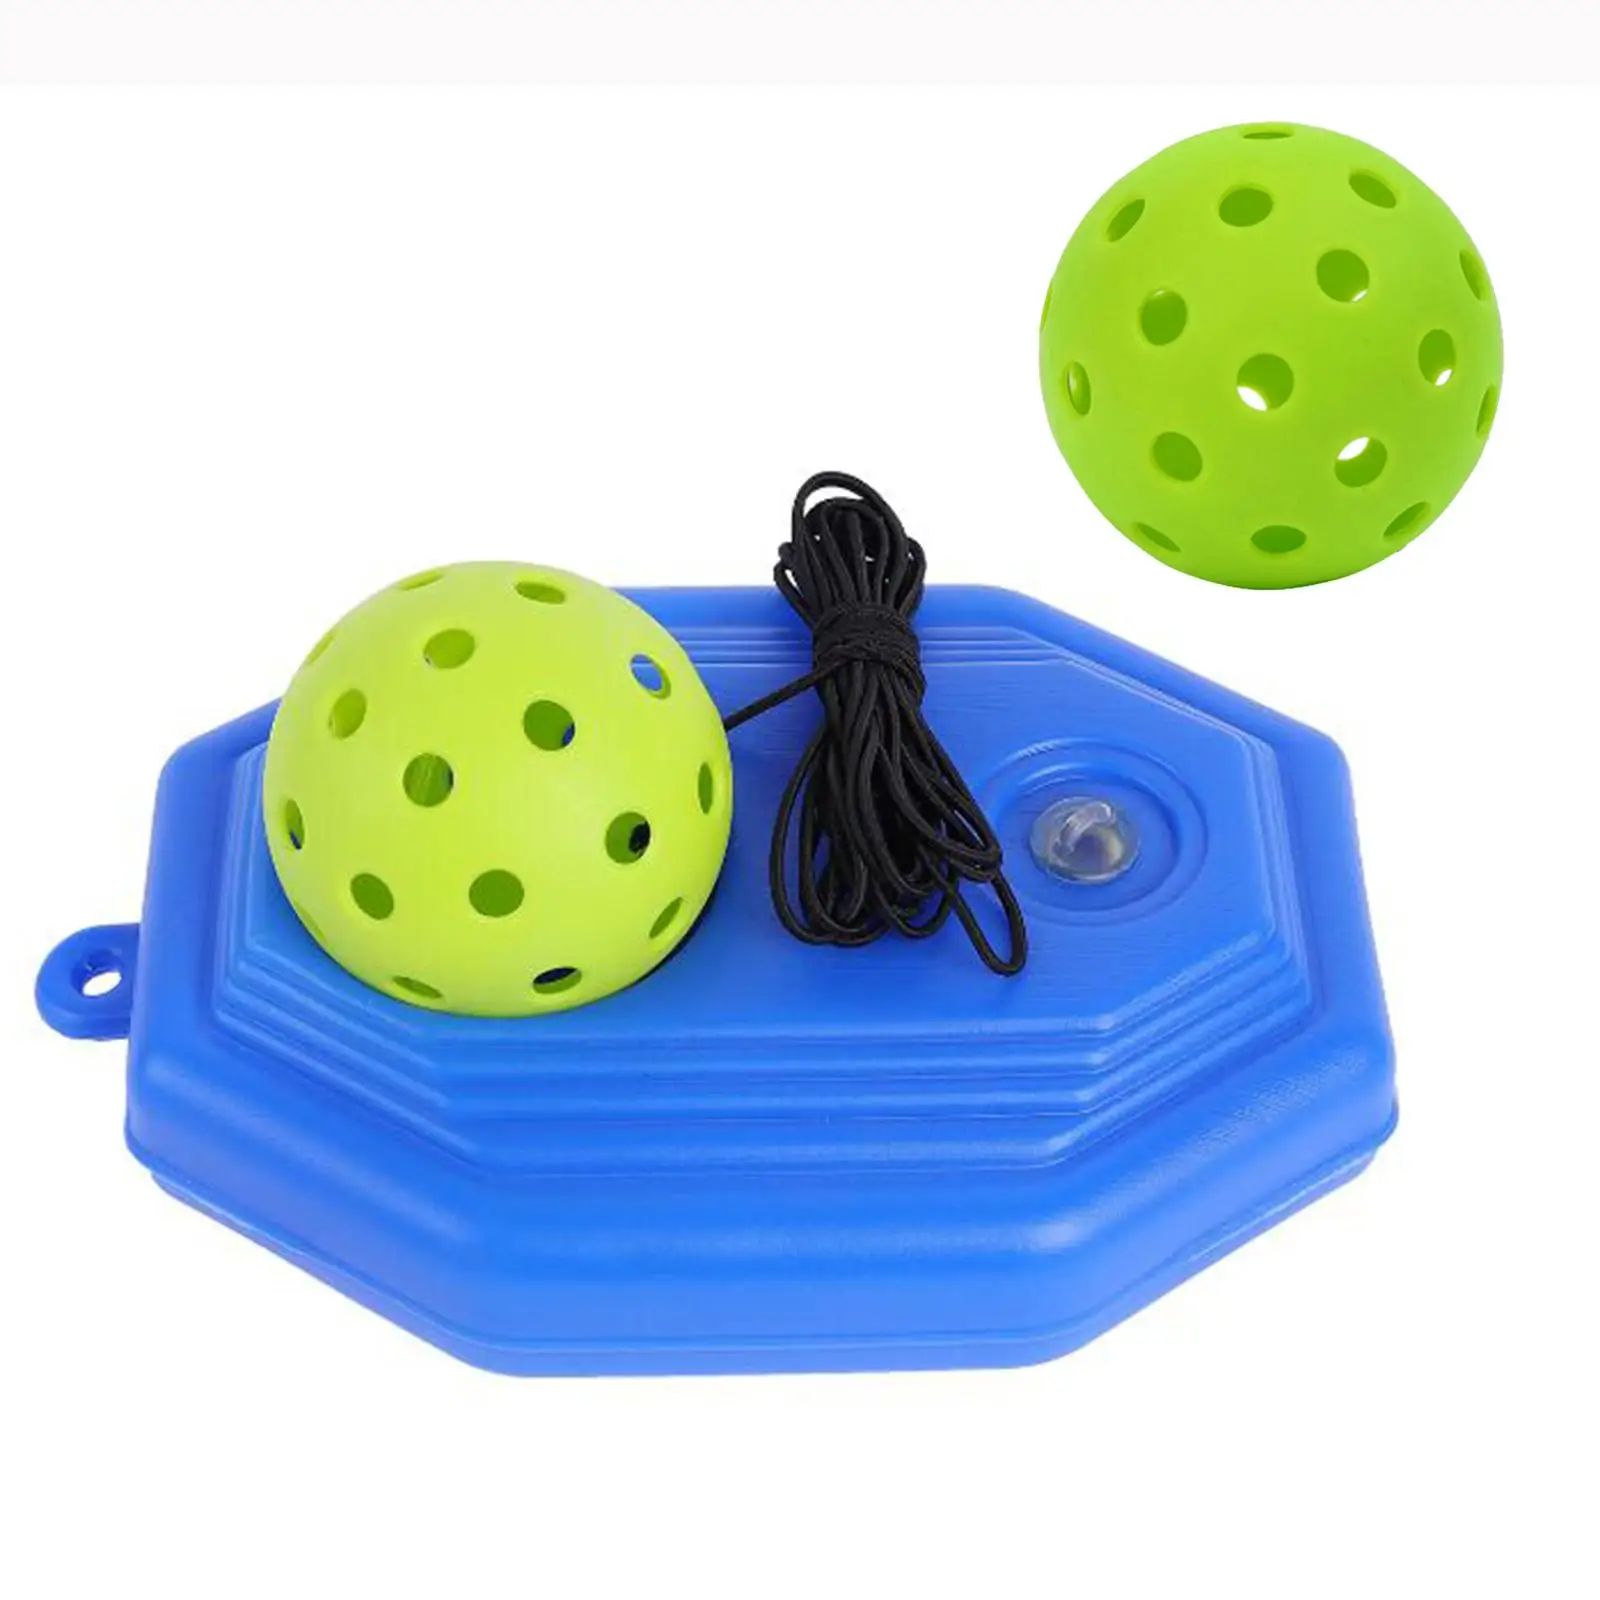 Pickleball Trainer with Pickleball Ball Pickleball Training Base for Solo Tennis Training Outdoor Indoor Kids Adults Exercise